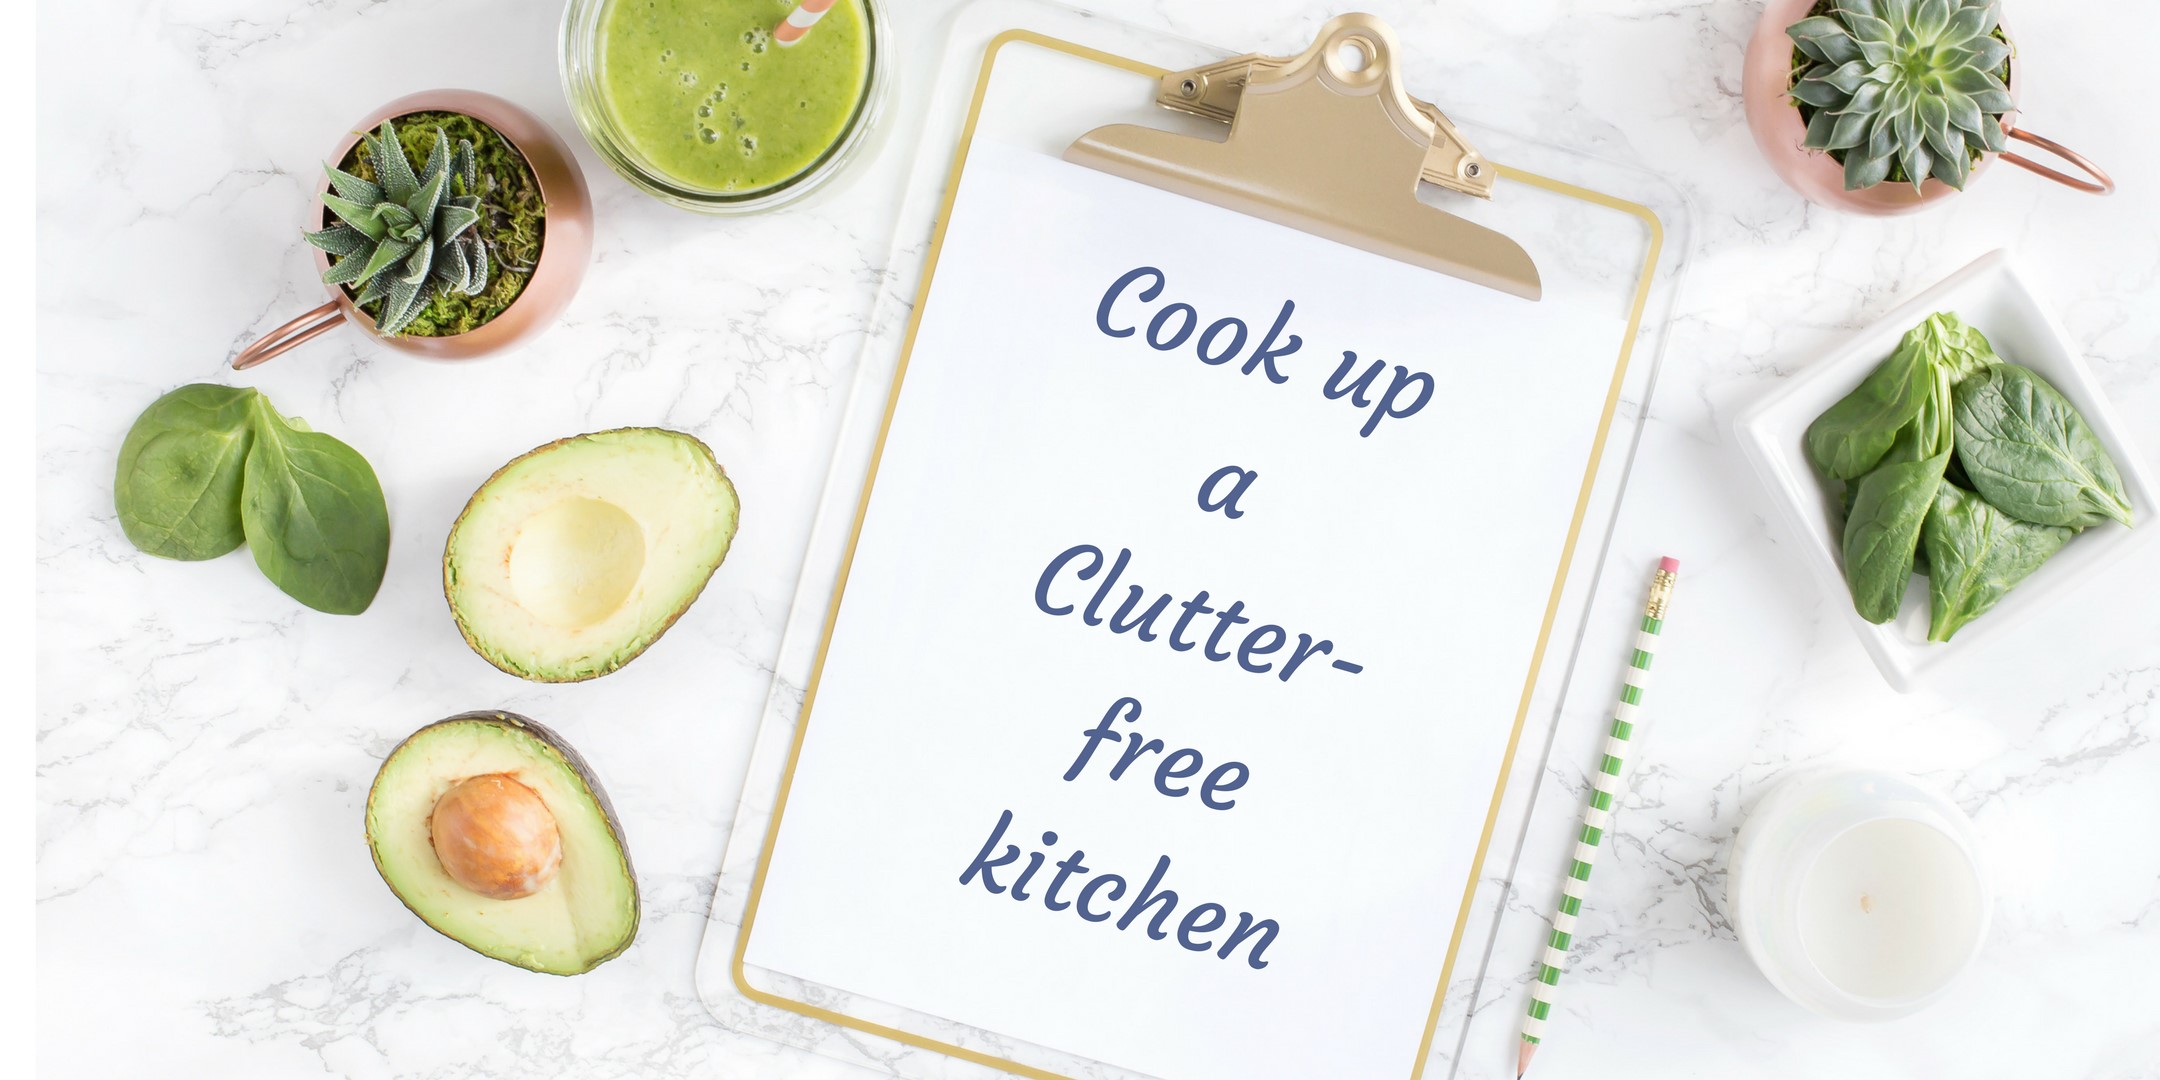 Clutter-free Kitchens Start with a Plan!